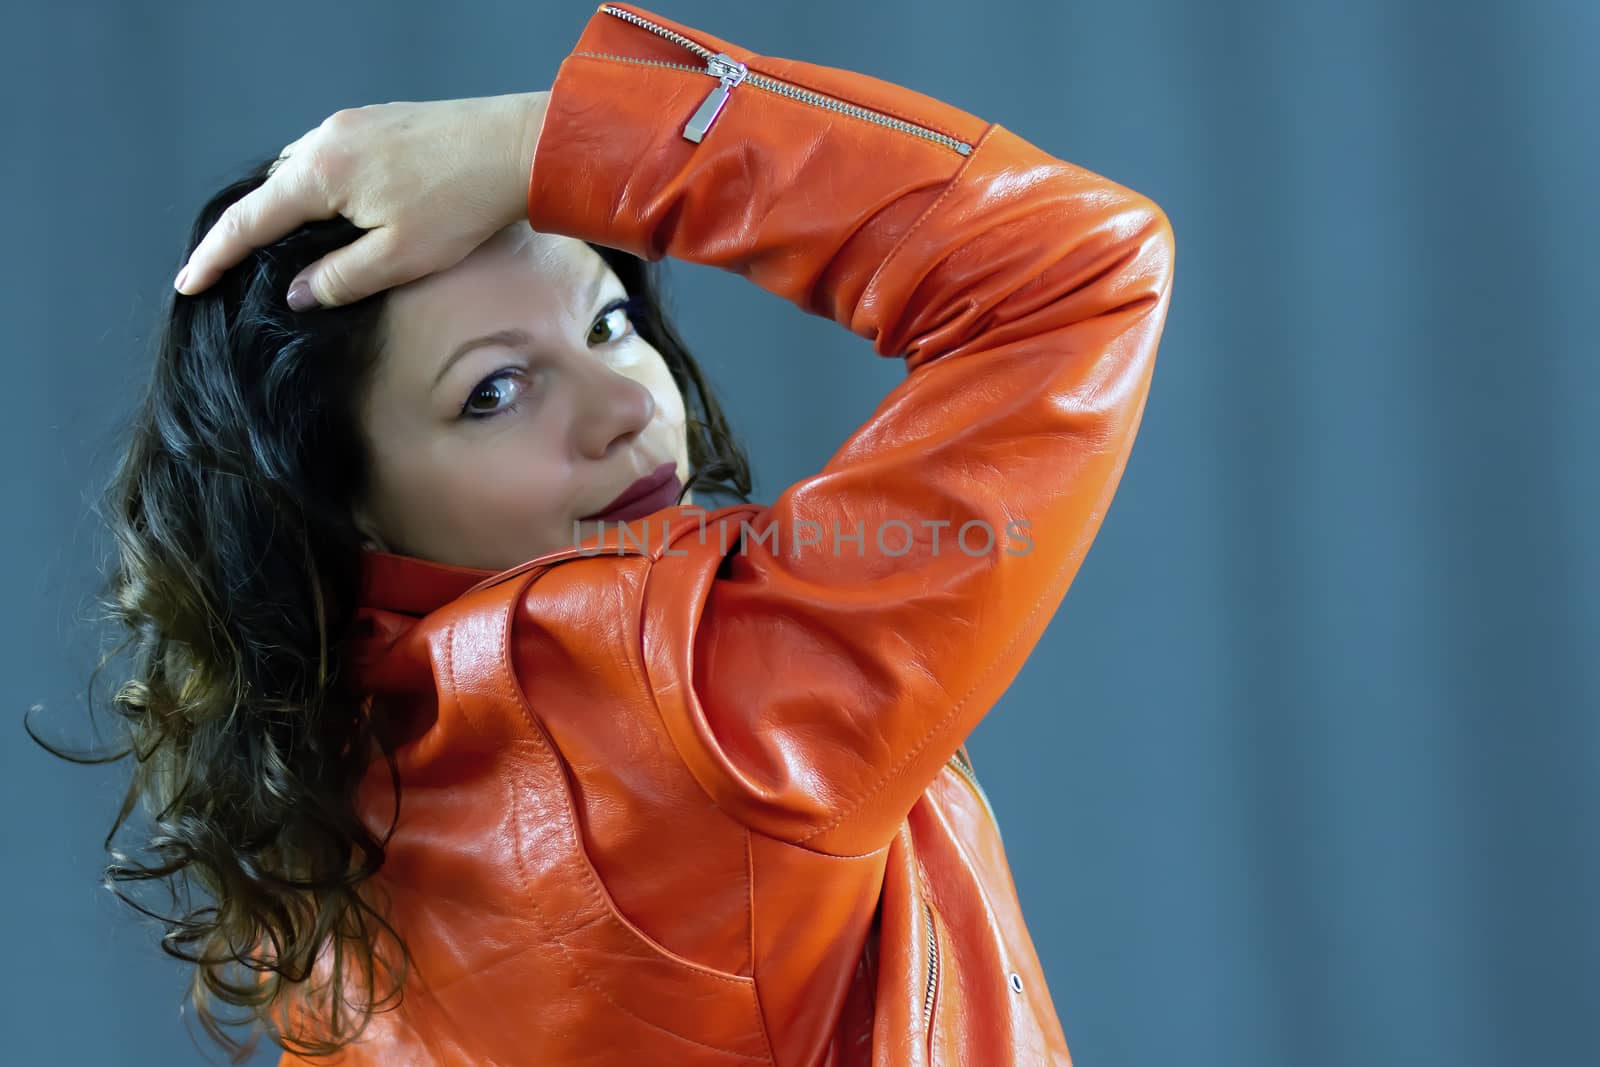 Portrait of a beautiful fashionable middle-aged woman in a bright orange leather jacket, posing on a dark gray background